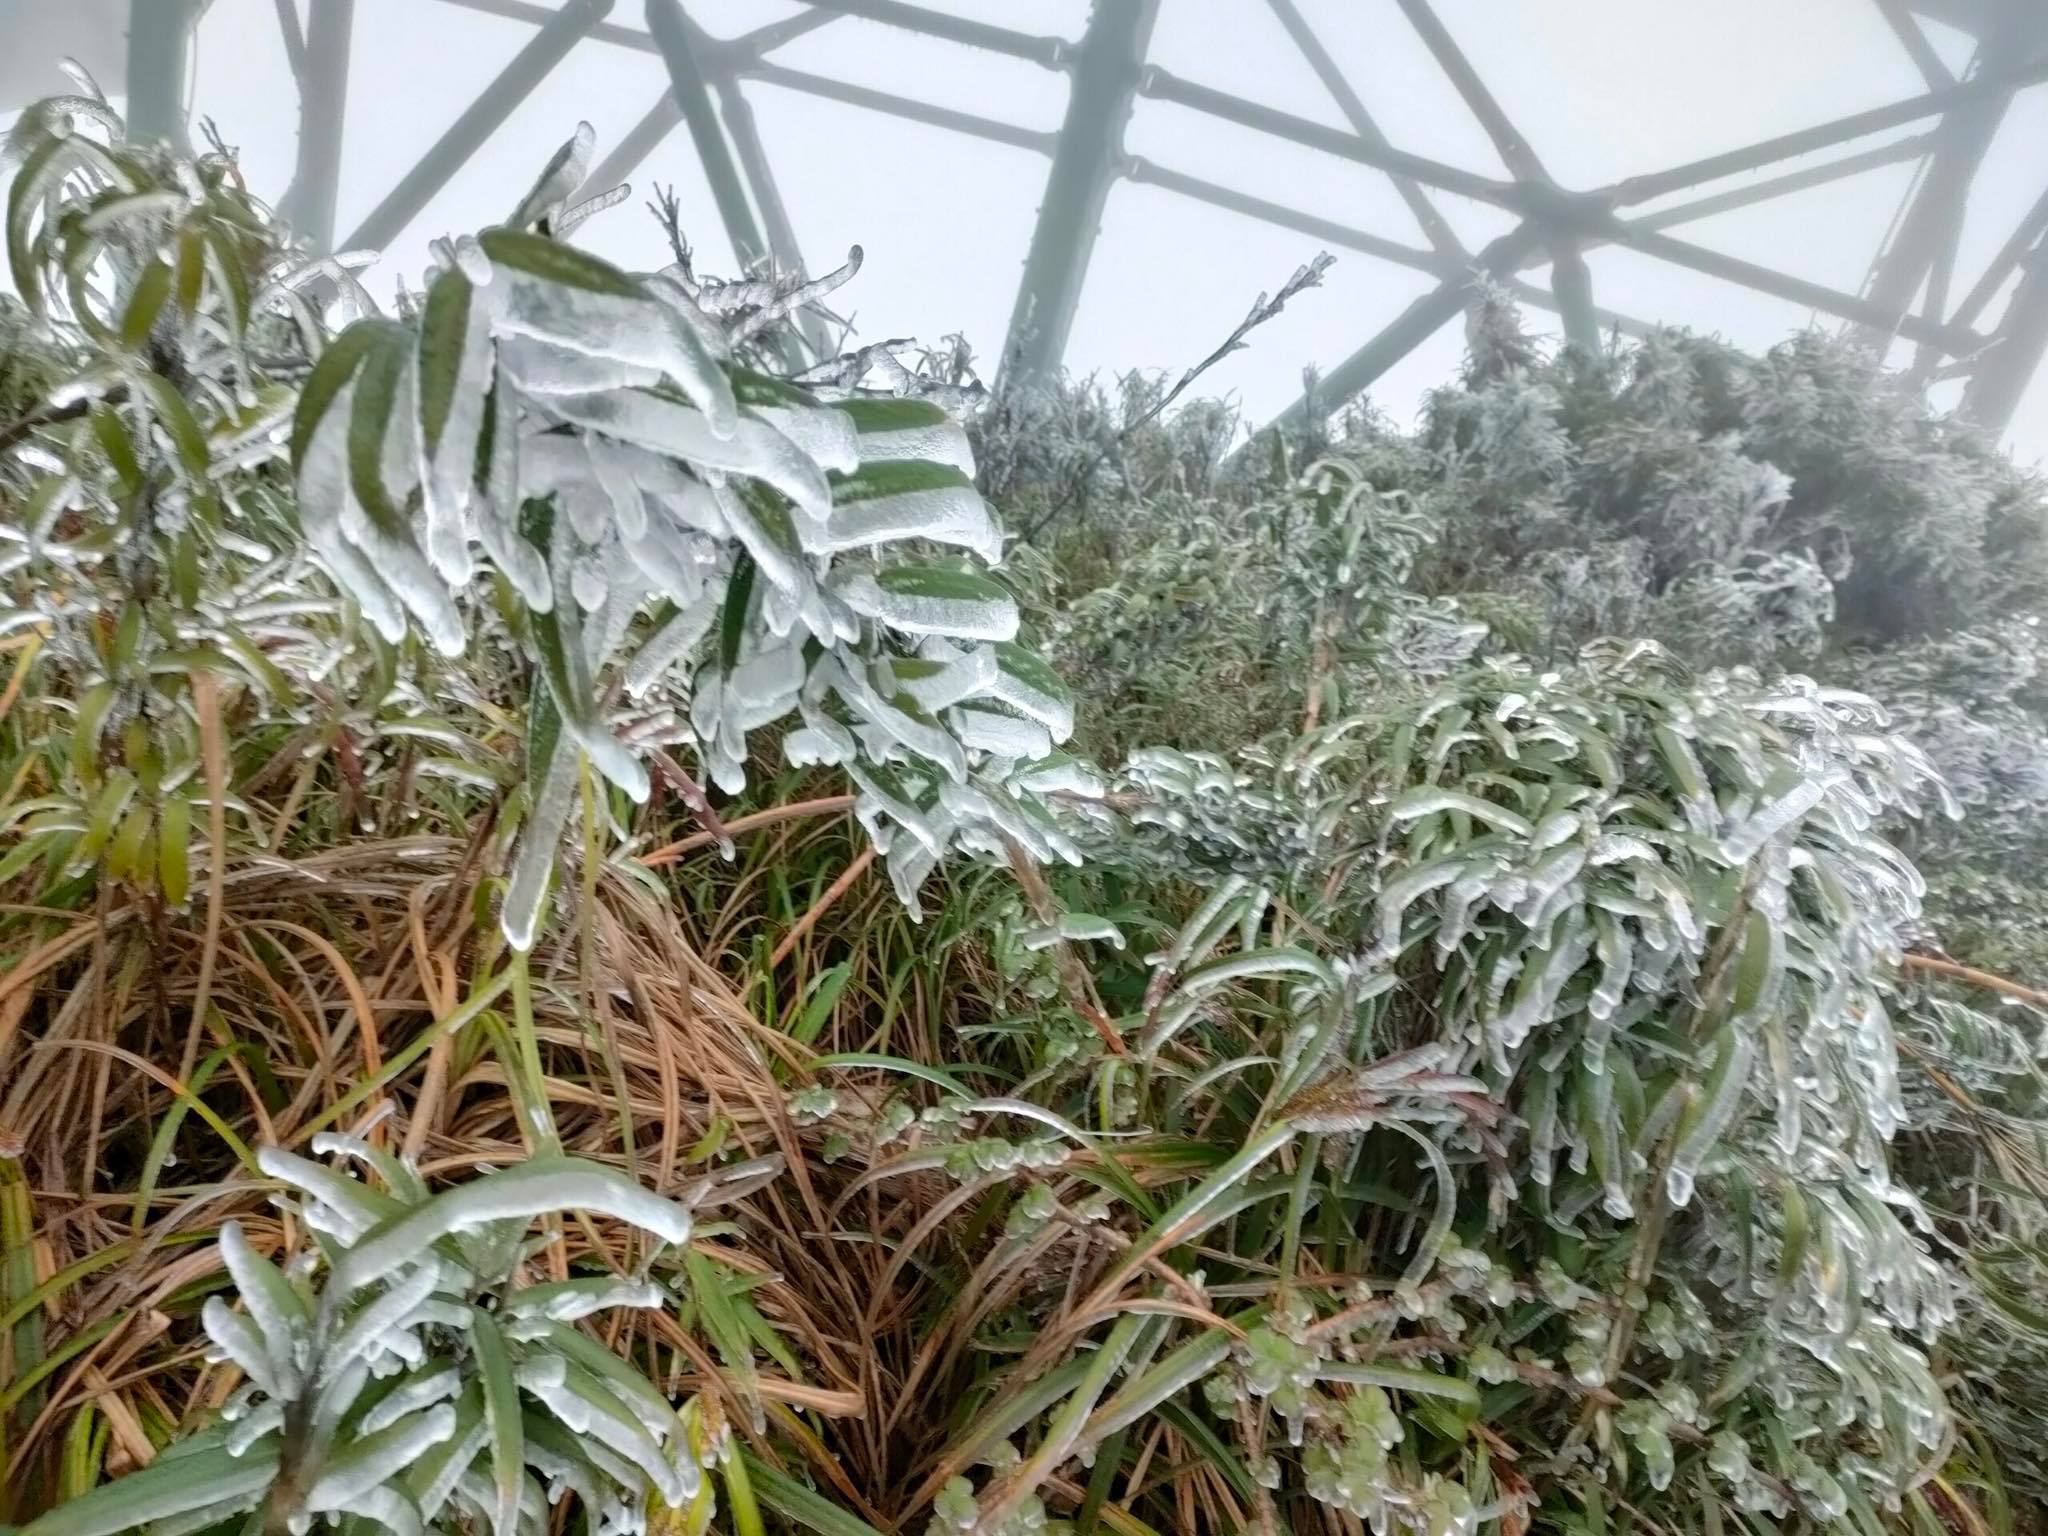 Frost suddenly covered the top of Fansipan when the temperature dropped to -1 degrees Celsius - 3 degrees